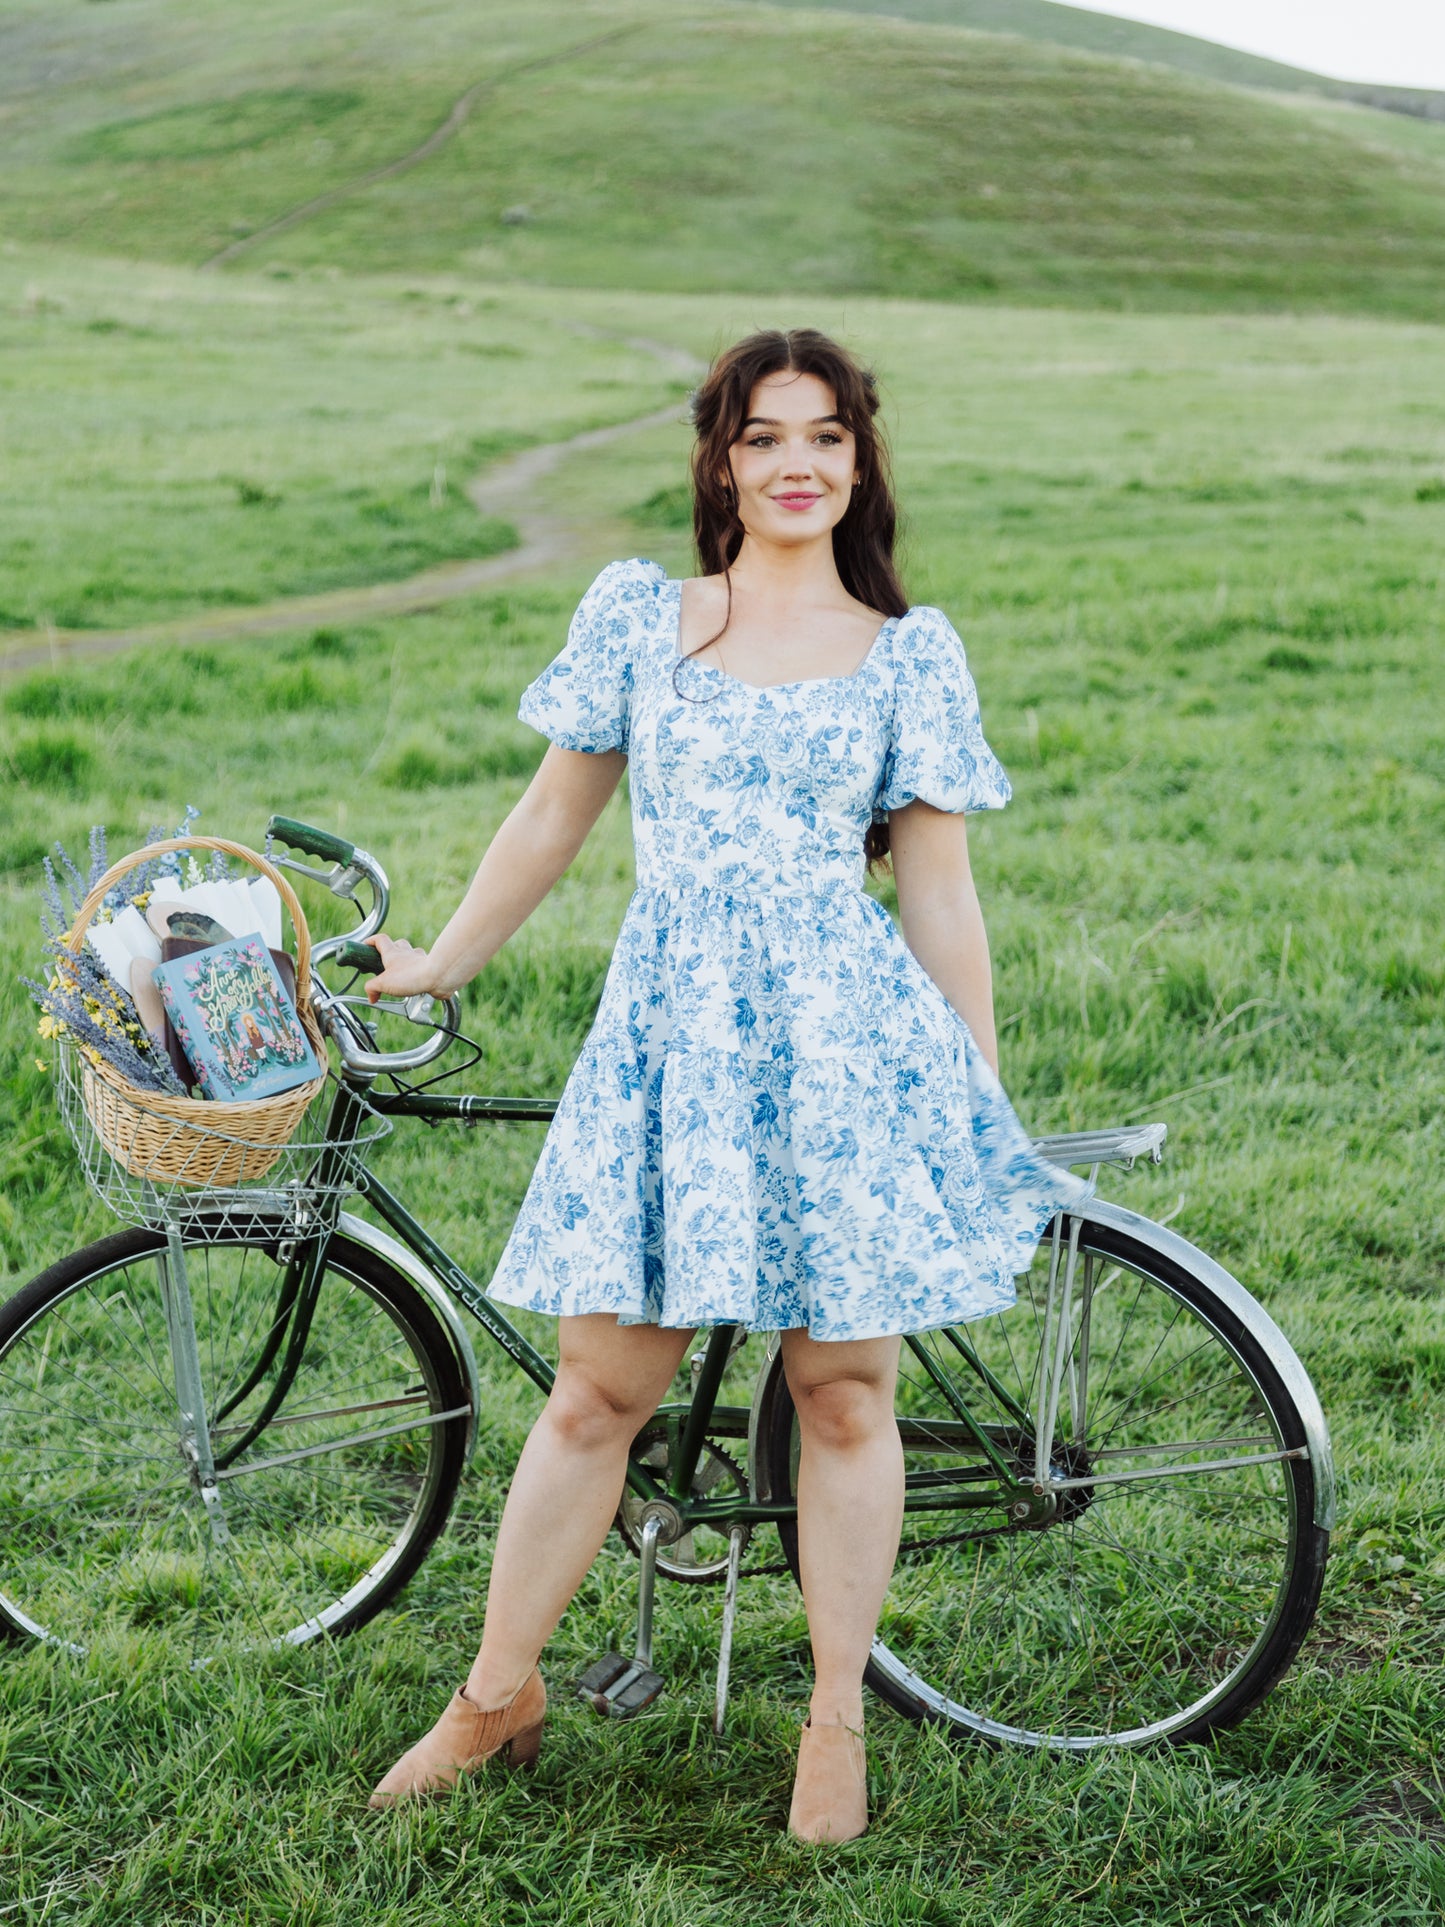 The Princess Puff Dress in Countryside